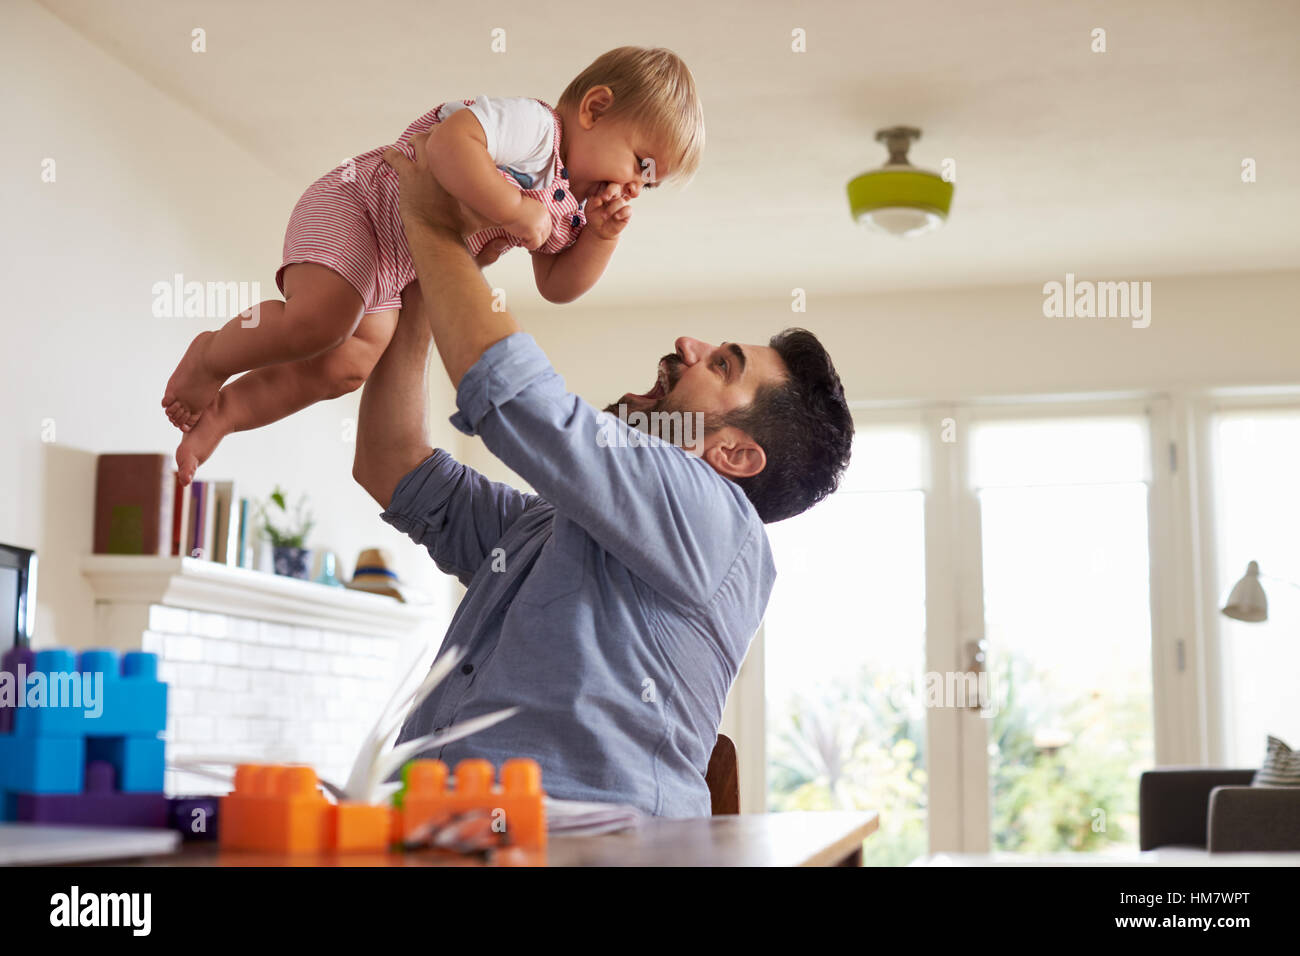 Father Sits At Table And Plays With Baby Son At Home Stock Photo